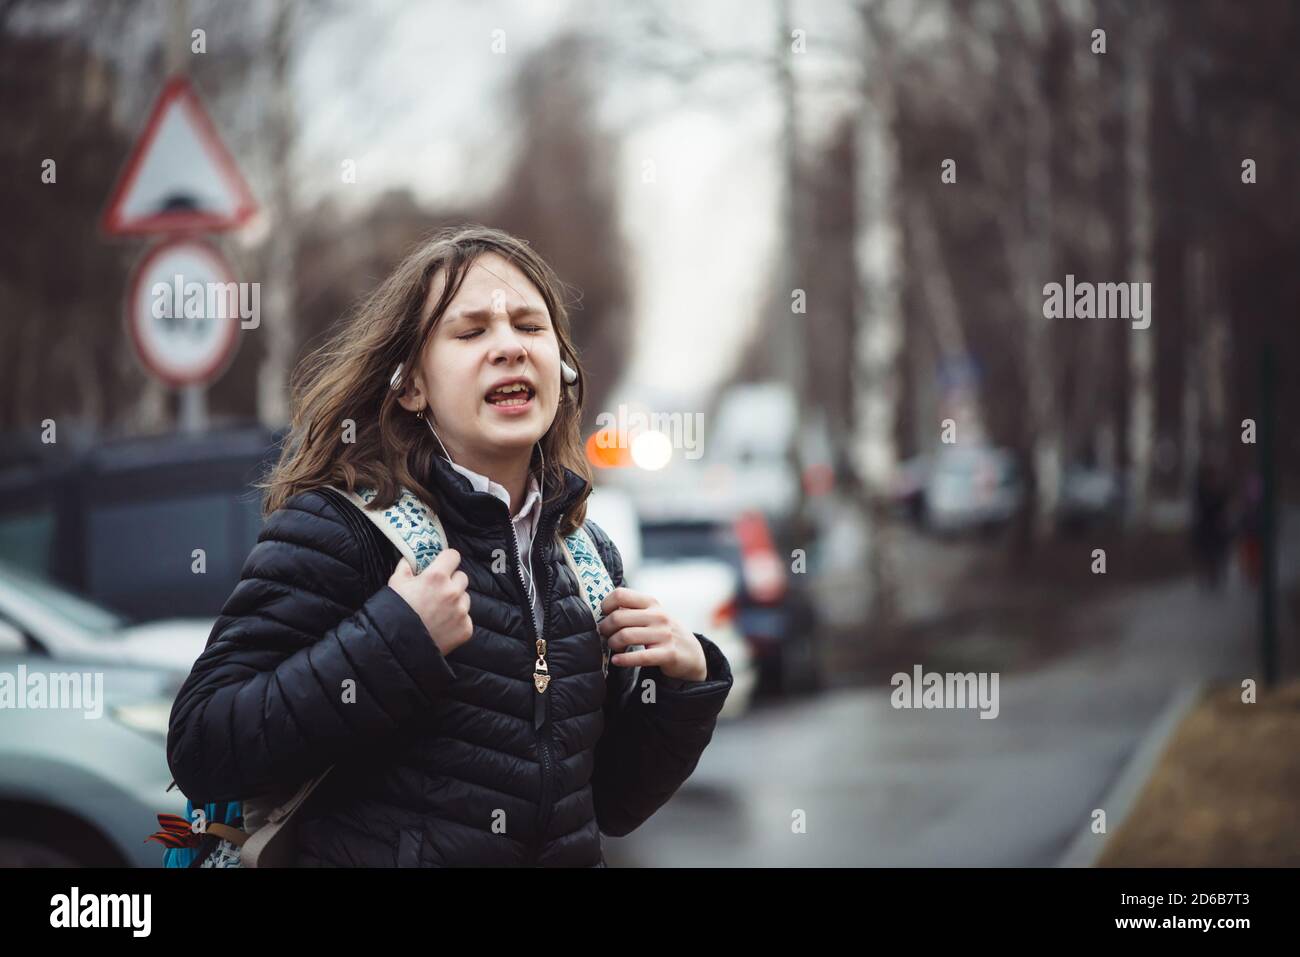 Emotional explosion of capricious teen. Crazy schoolgirl with backpack in depressed state in city in rainy weather. Emotion surge swept young girl wit Stock Photo